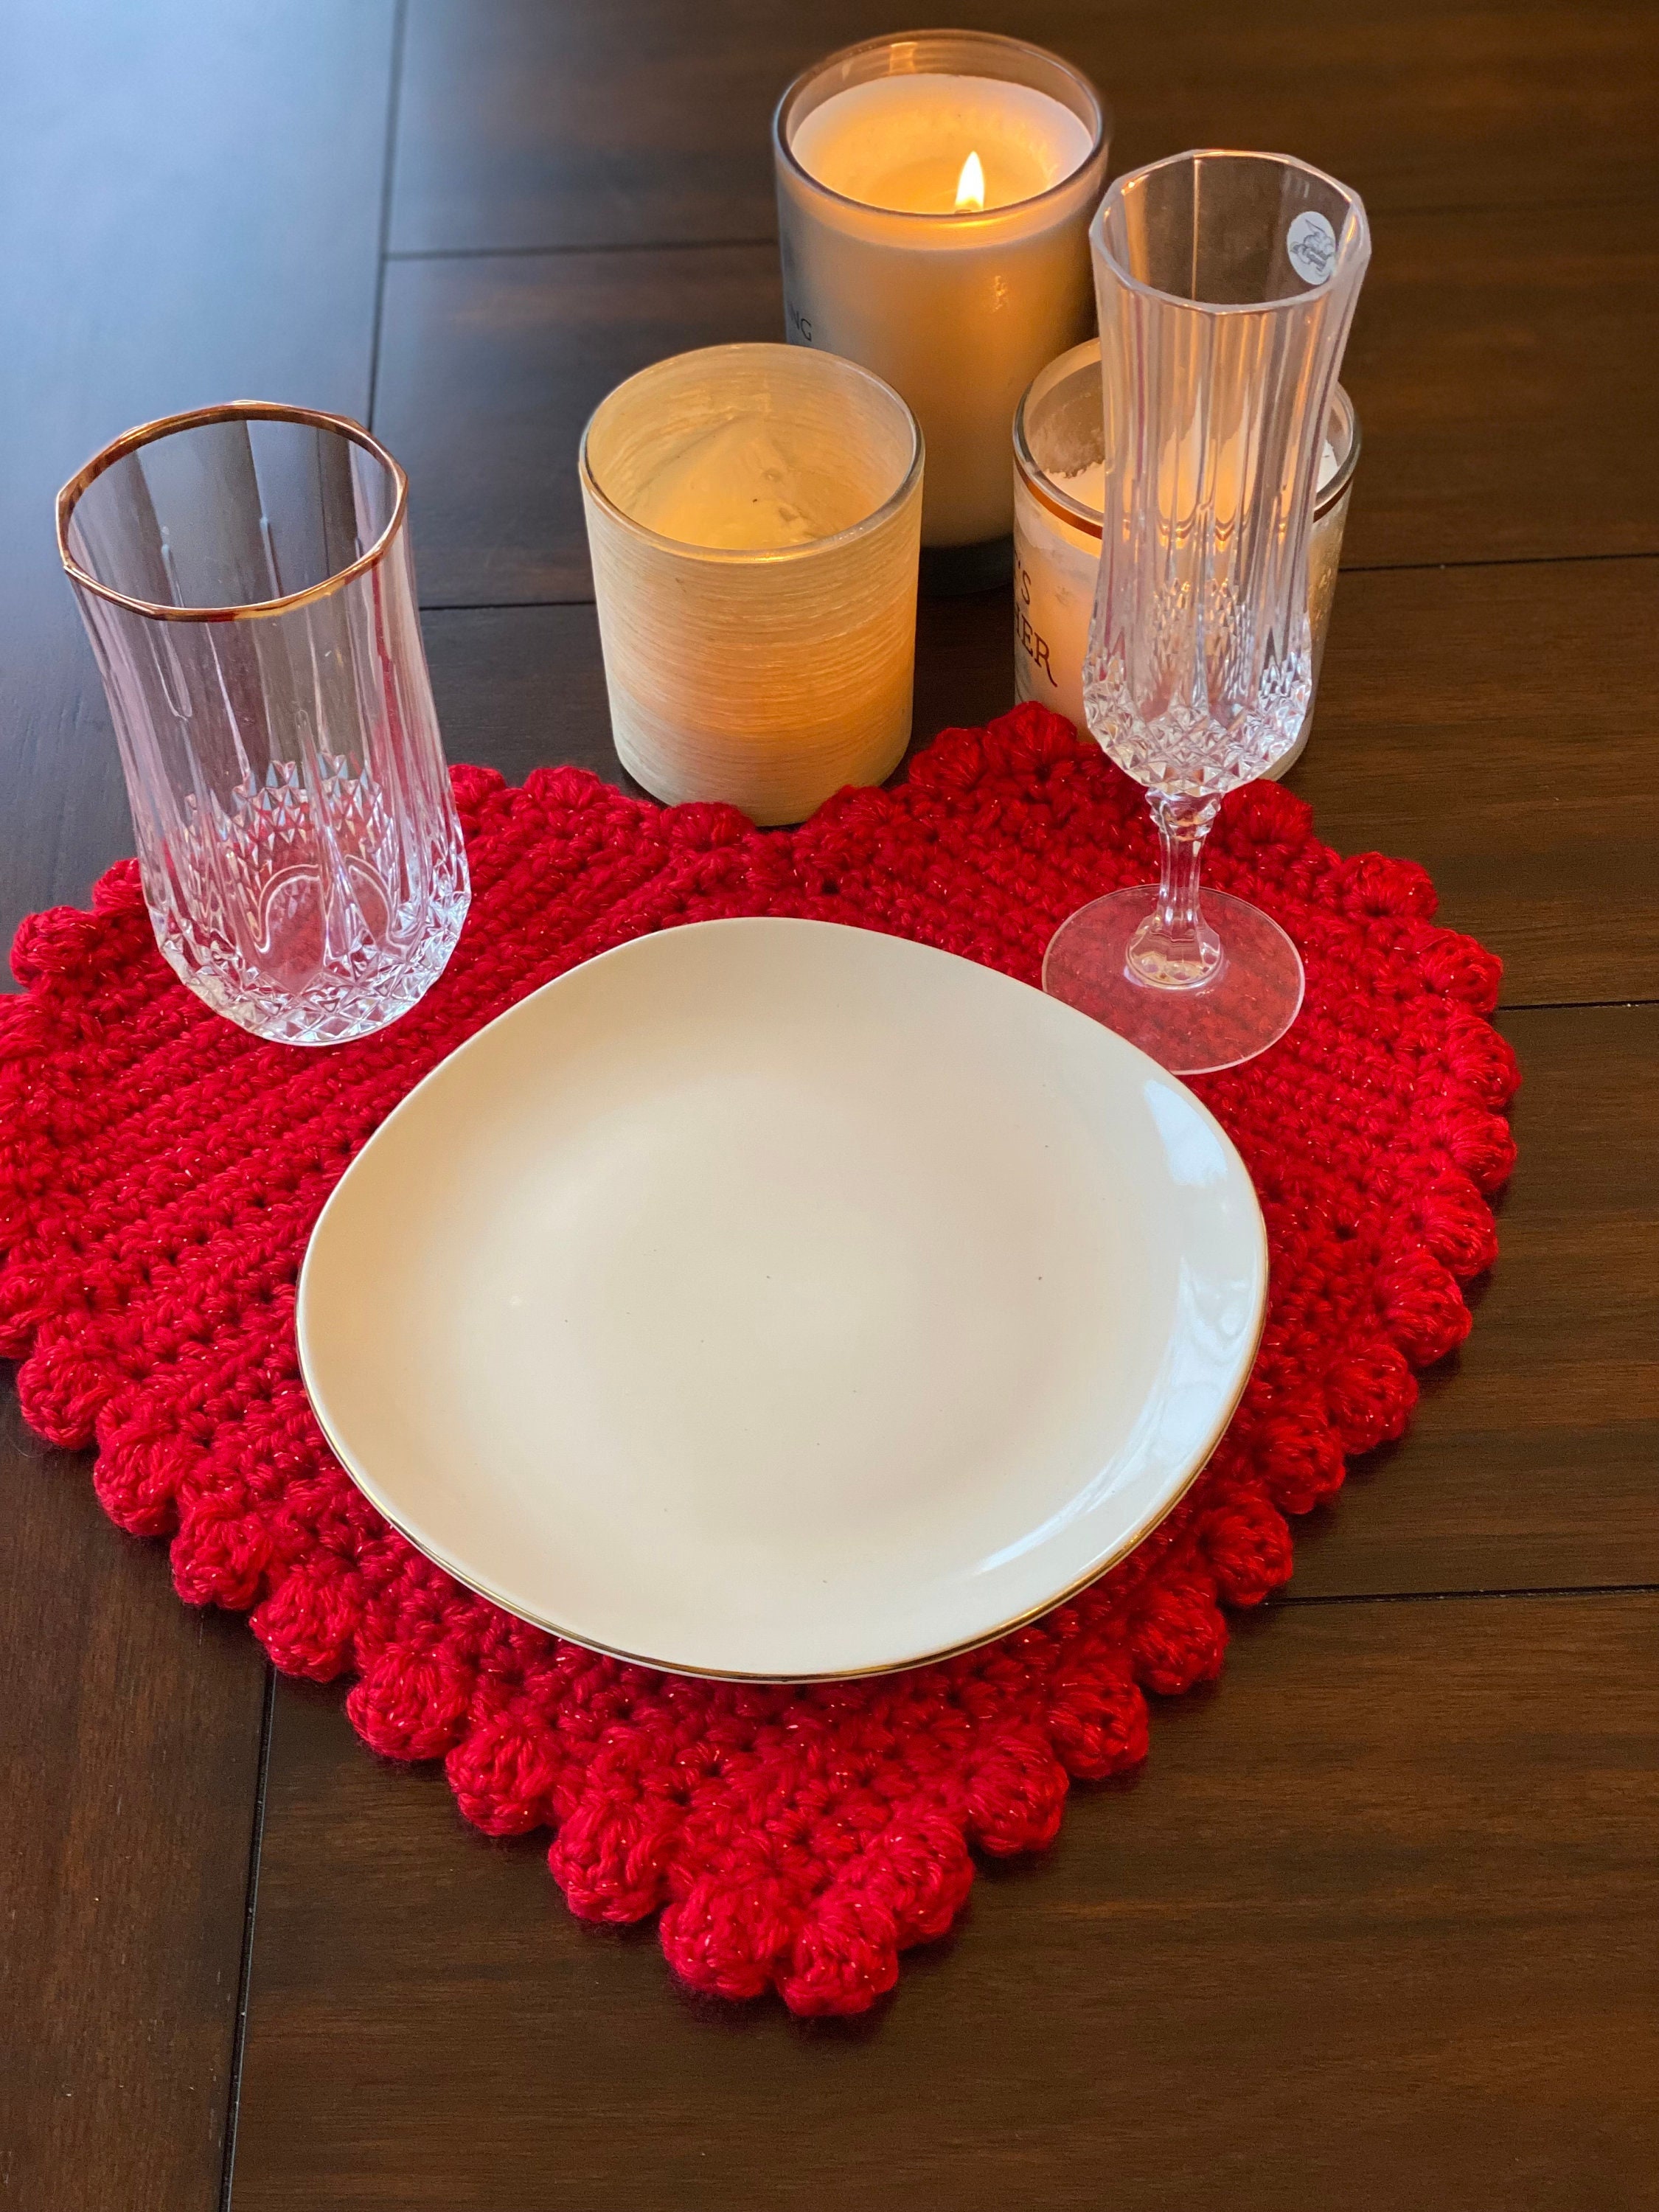 4 Vintage 70s Pink and White Yarn Crochet Placemats W/ 4 Trivet Coasters  Ruffle